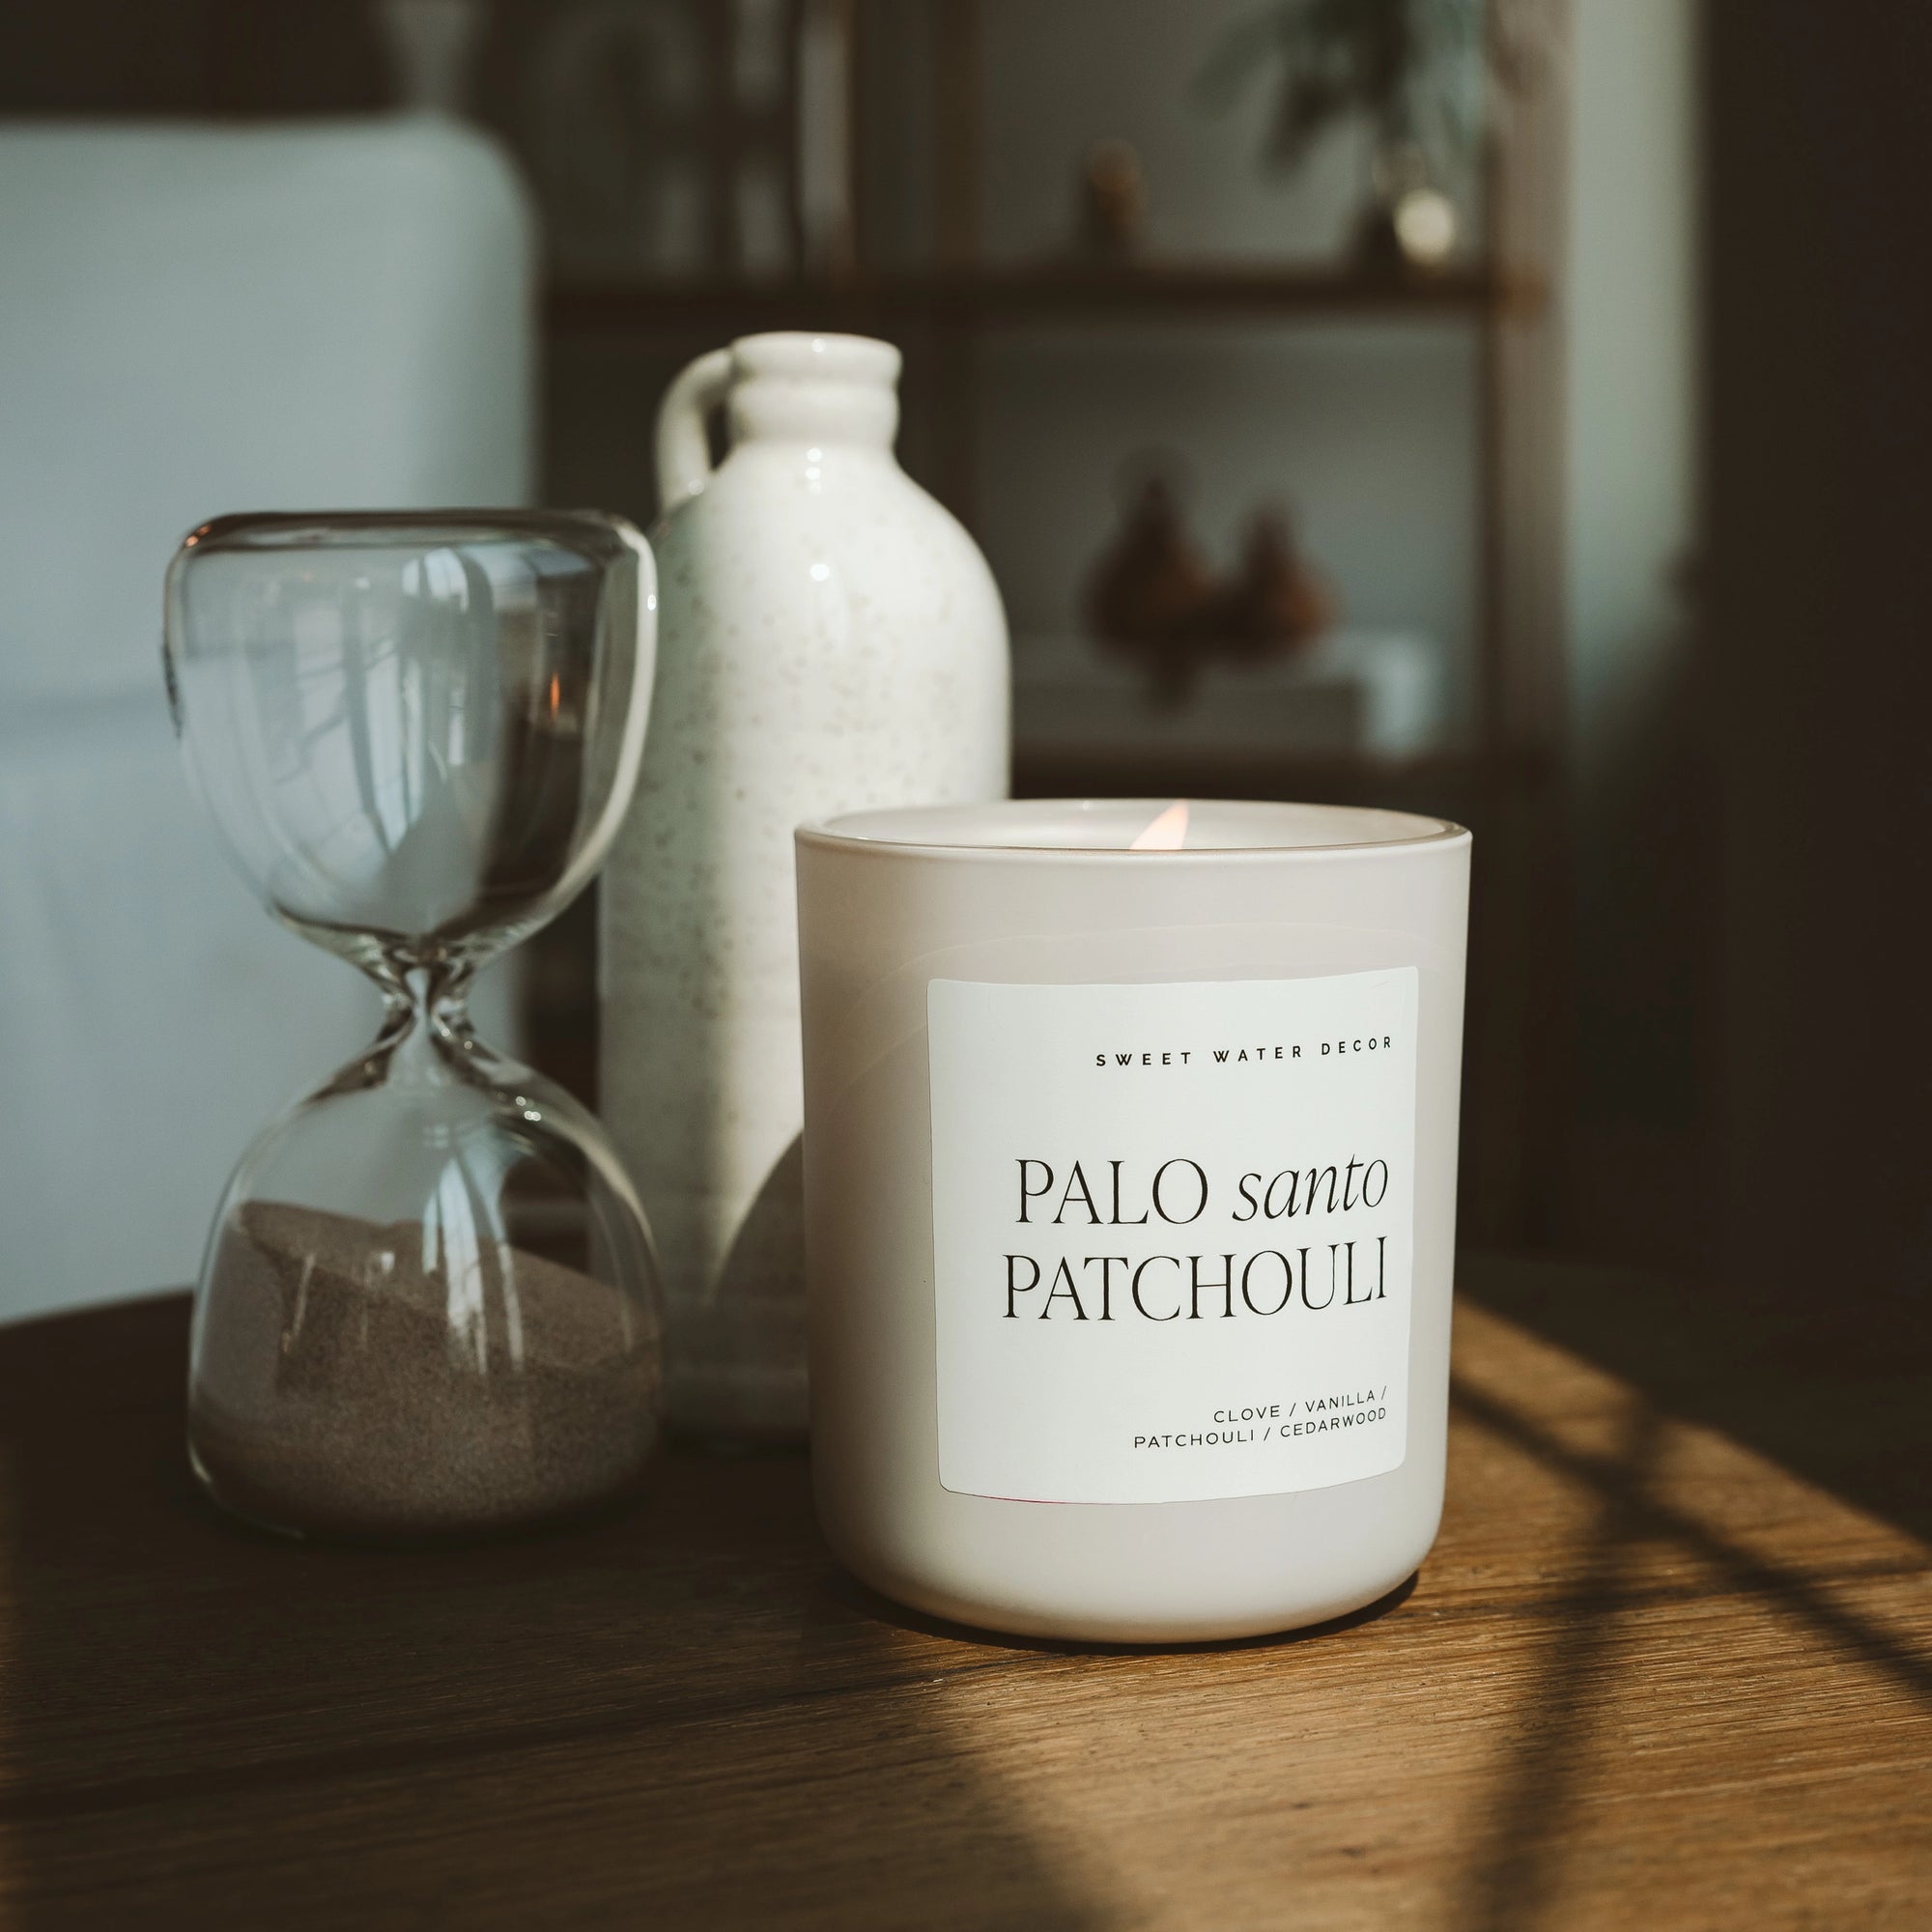 Palo Santo Patchouli soy candle in matte white jar, lit on a cupboard with other ornaments.